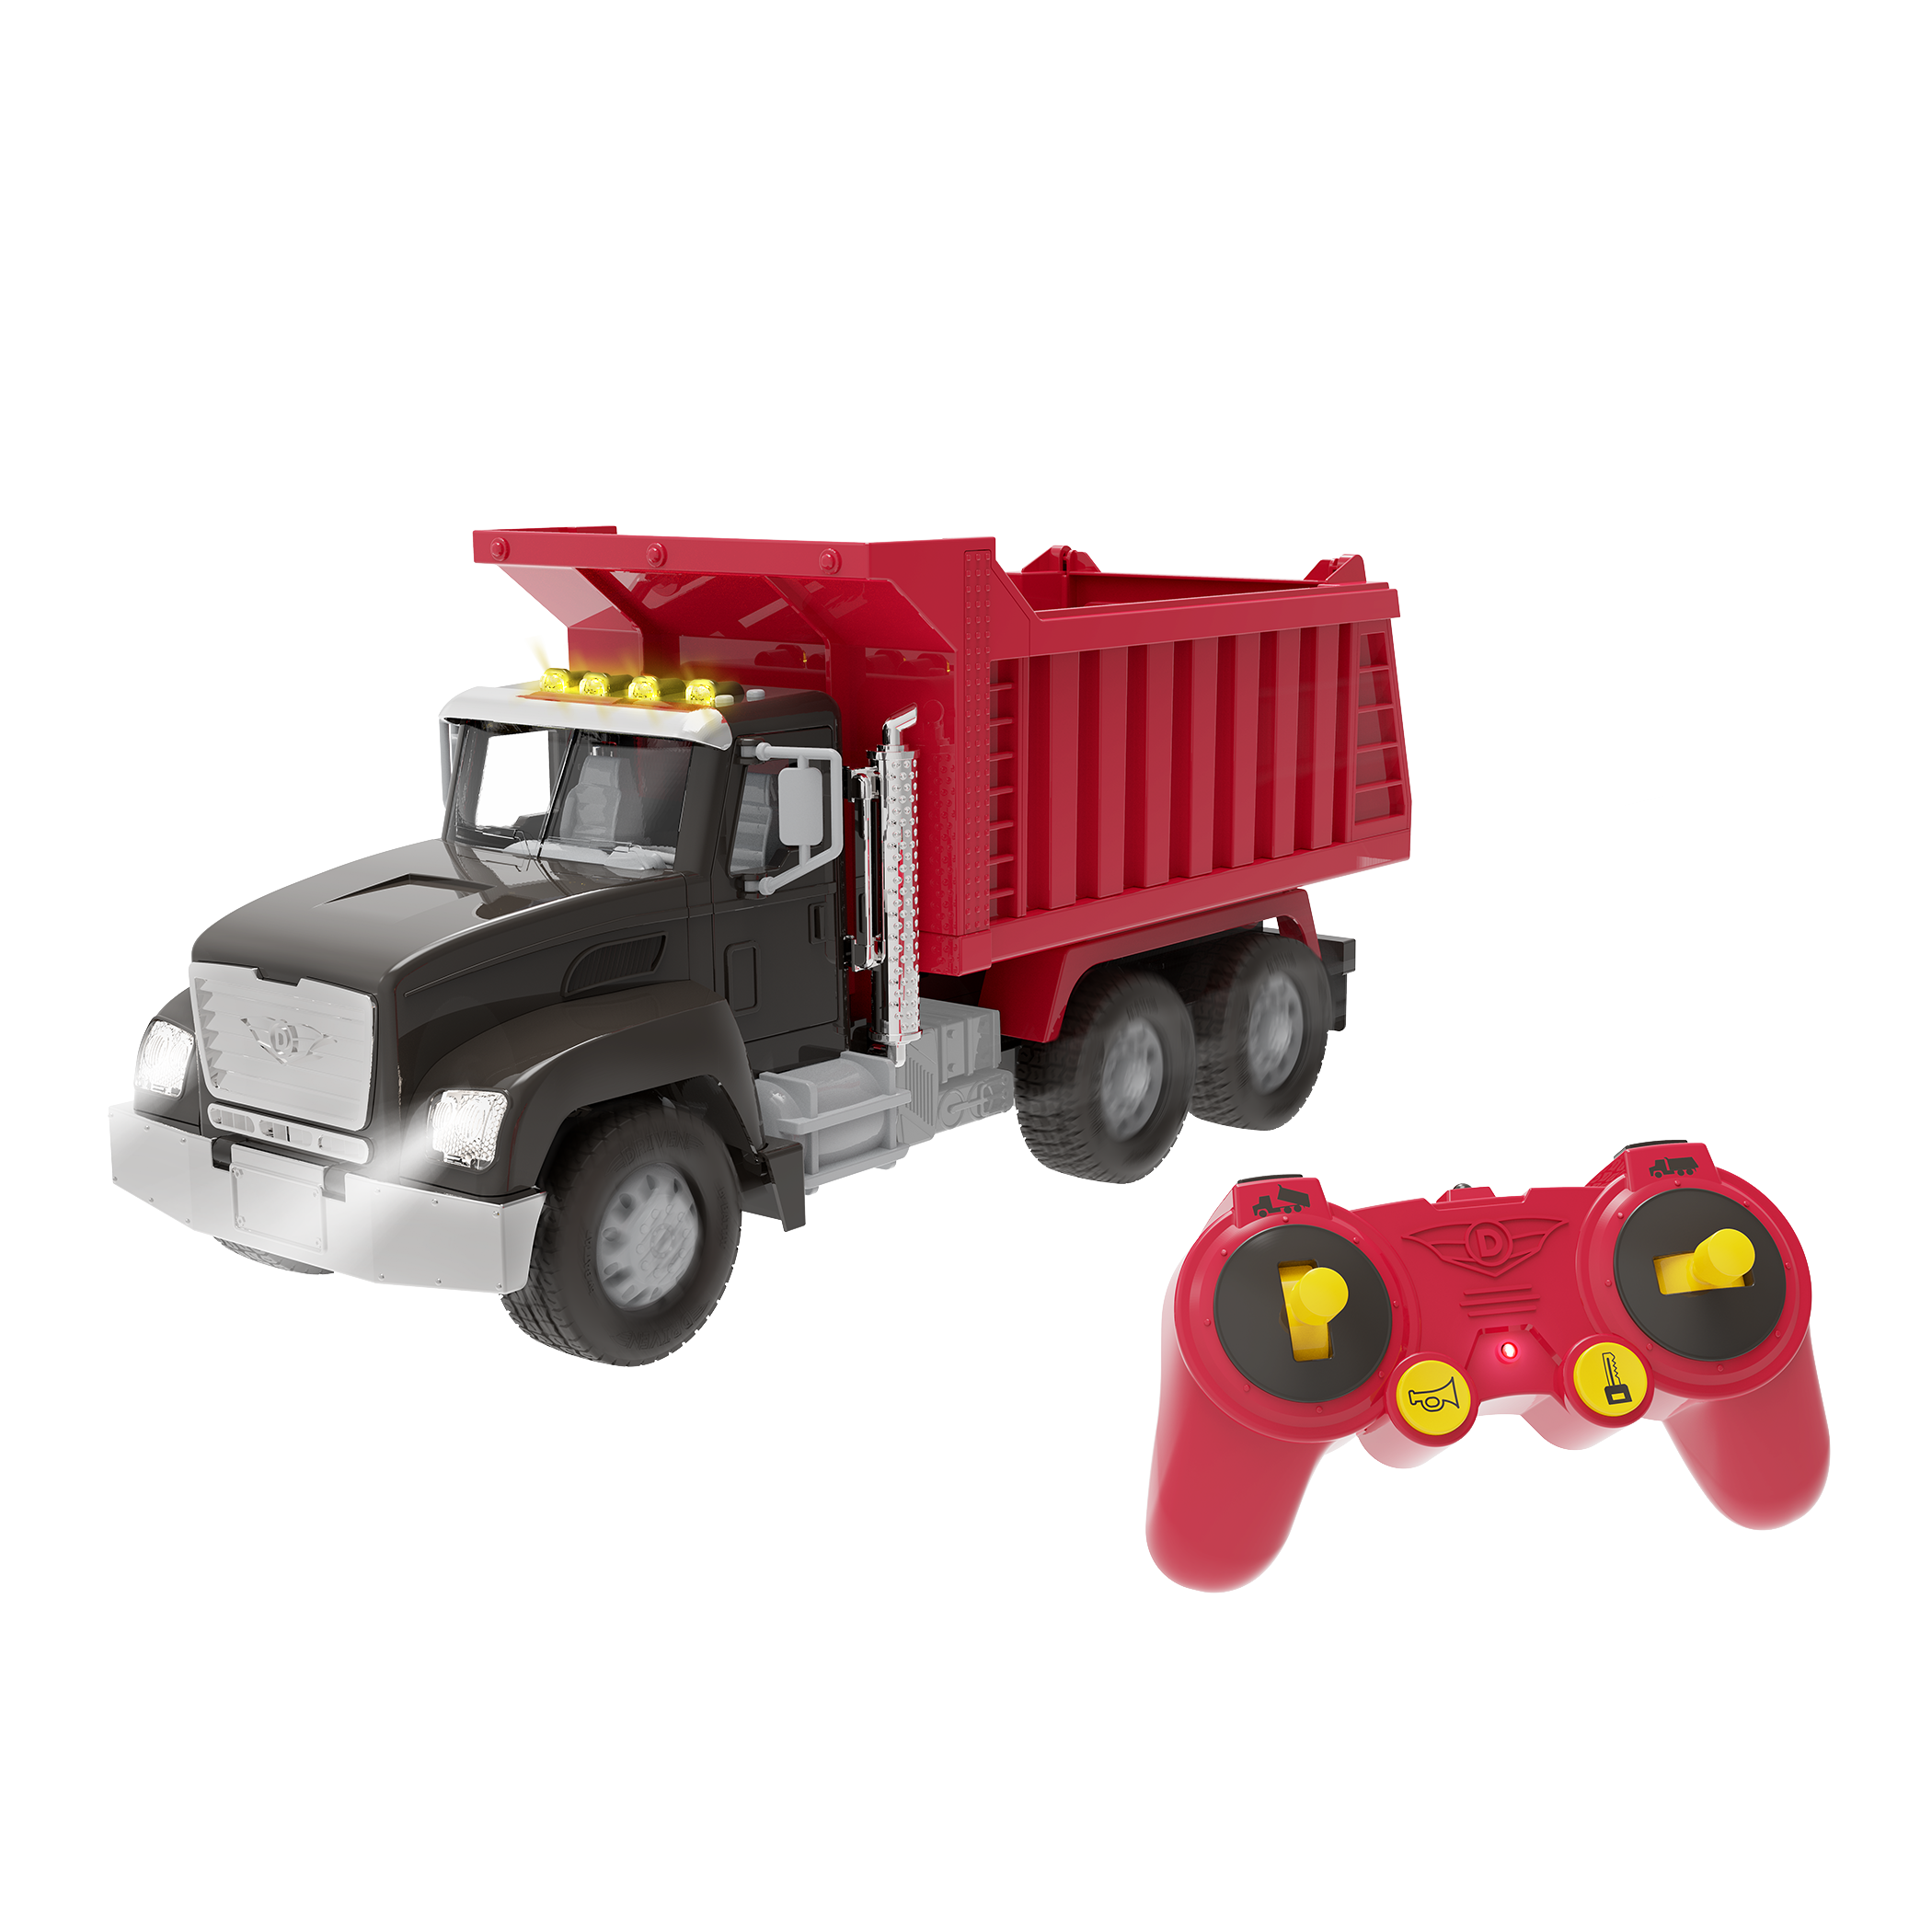 Details about   Giant Dump Truck Toy  14.75 x 24.25 x 14.25 inches 